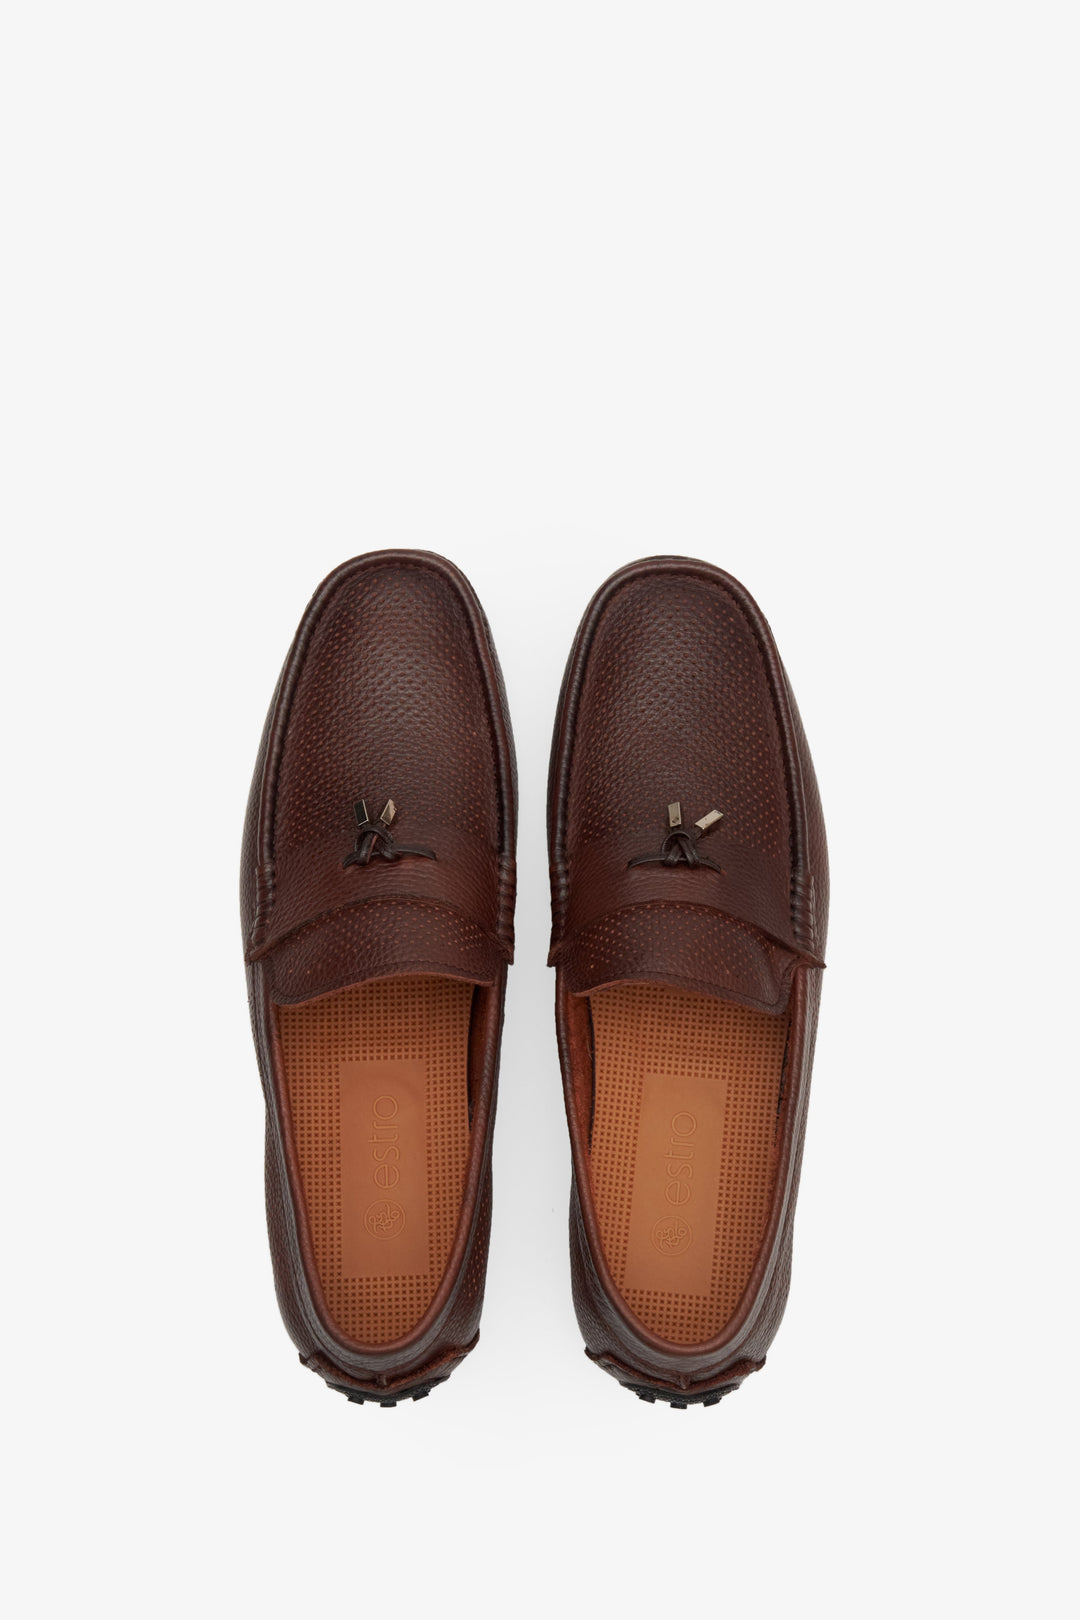 Men's brown leather loafers by Estro - top view shoe presentation.